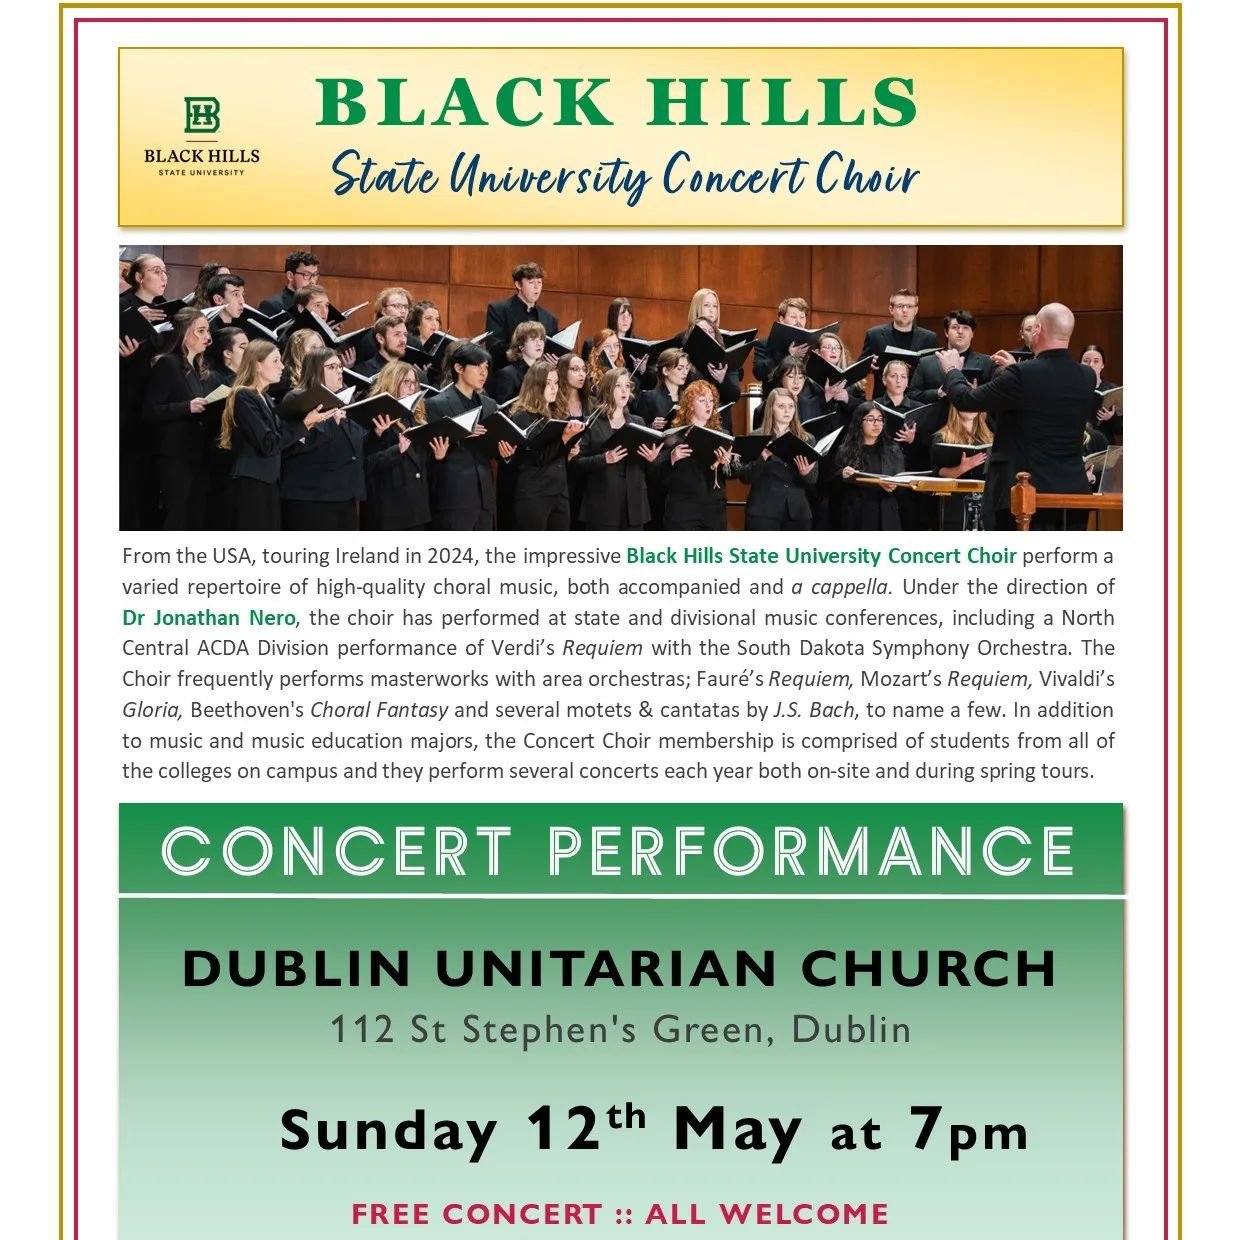 We are so looking forward to joining the Black Hills State University Concert Choir for a concert performance in Dublin's Unitarian Church at 7pm on Sunday 12th May. 

Entry is free and all are welcome!

. . .

#thingstodoindublin #visitdublin #disco